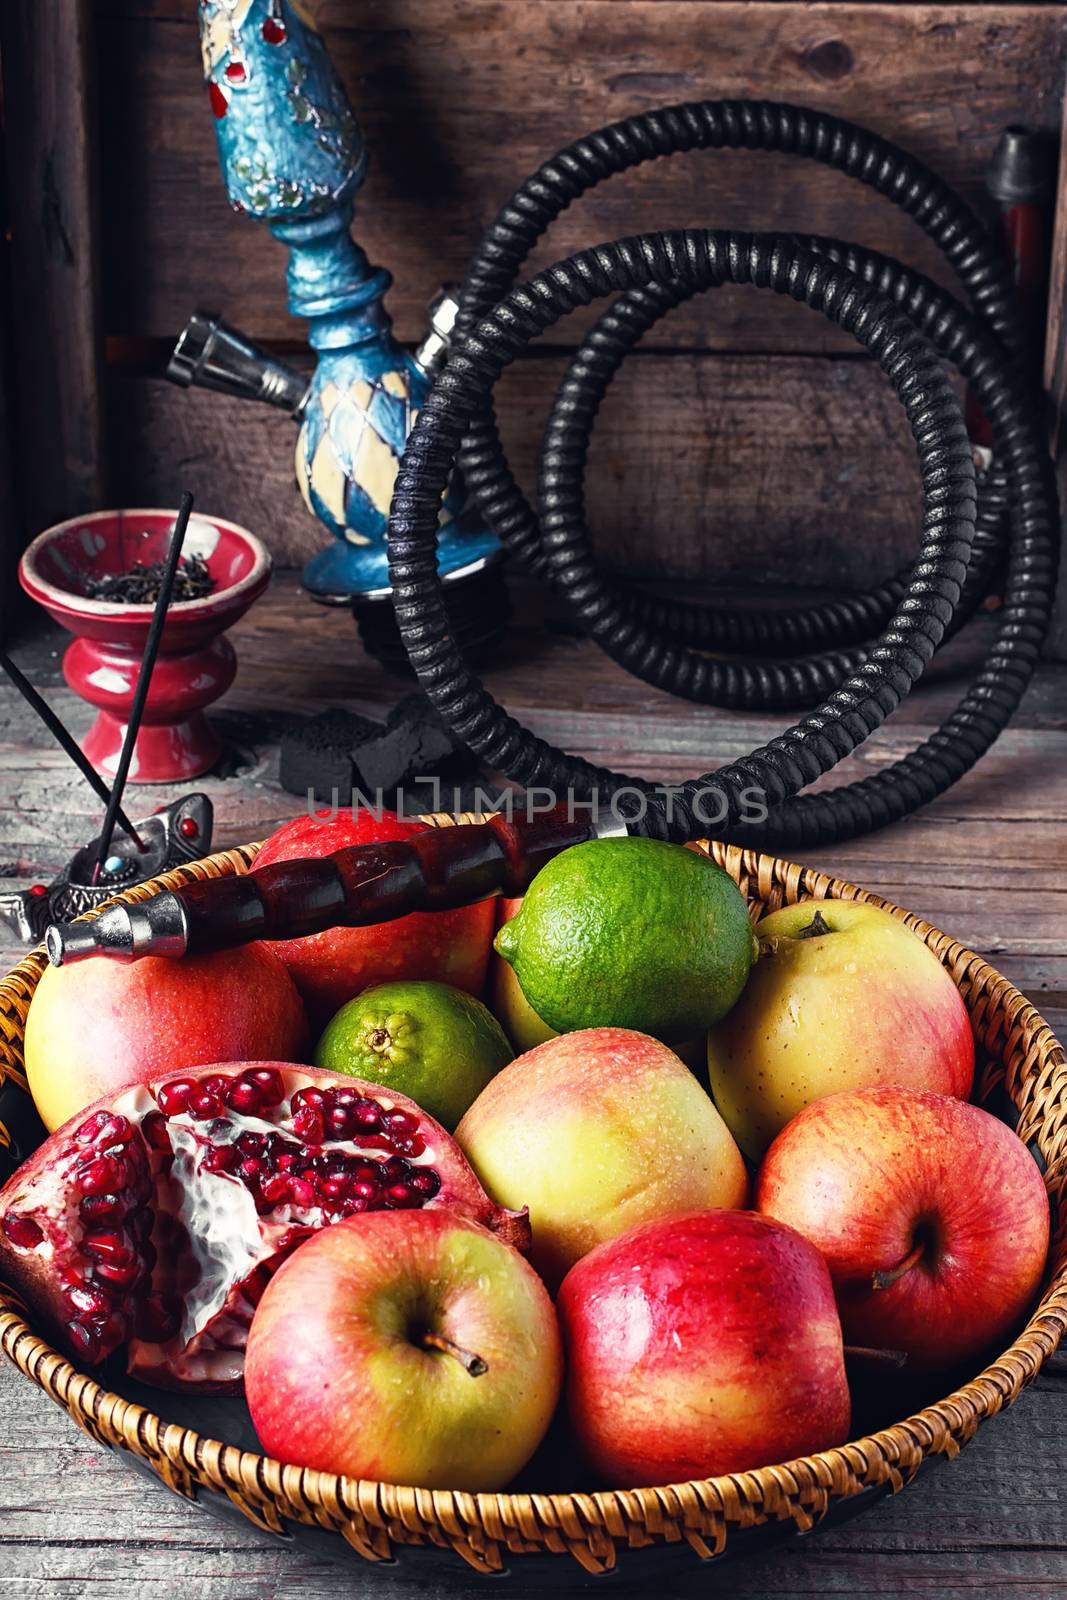 Stylish Smoking hookah and basket with apples,pomegranate and lime